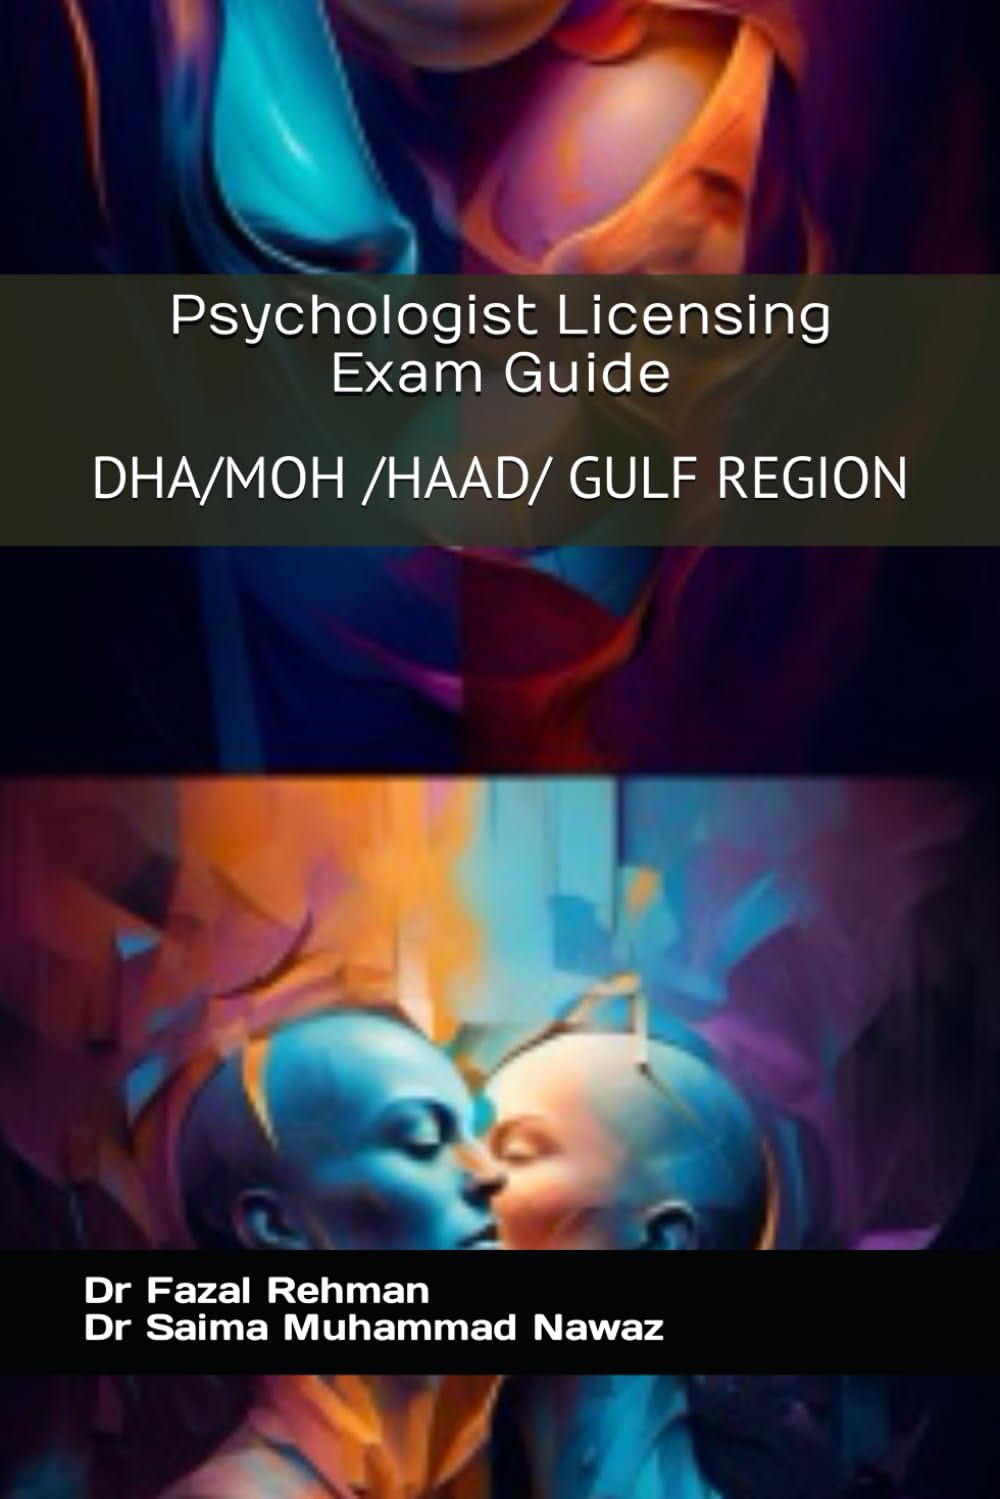 Psychologist Licensing Exam Guide: DHA/MOH /HAAD/ GULF REGION